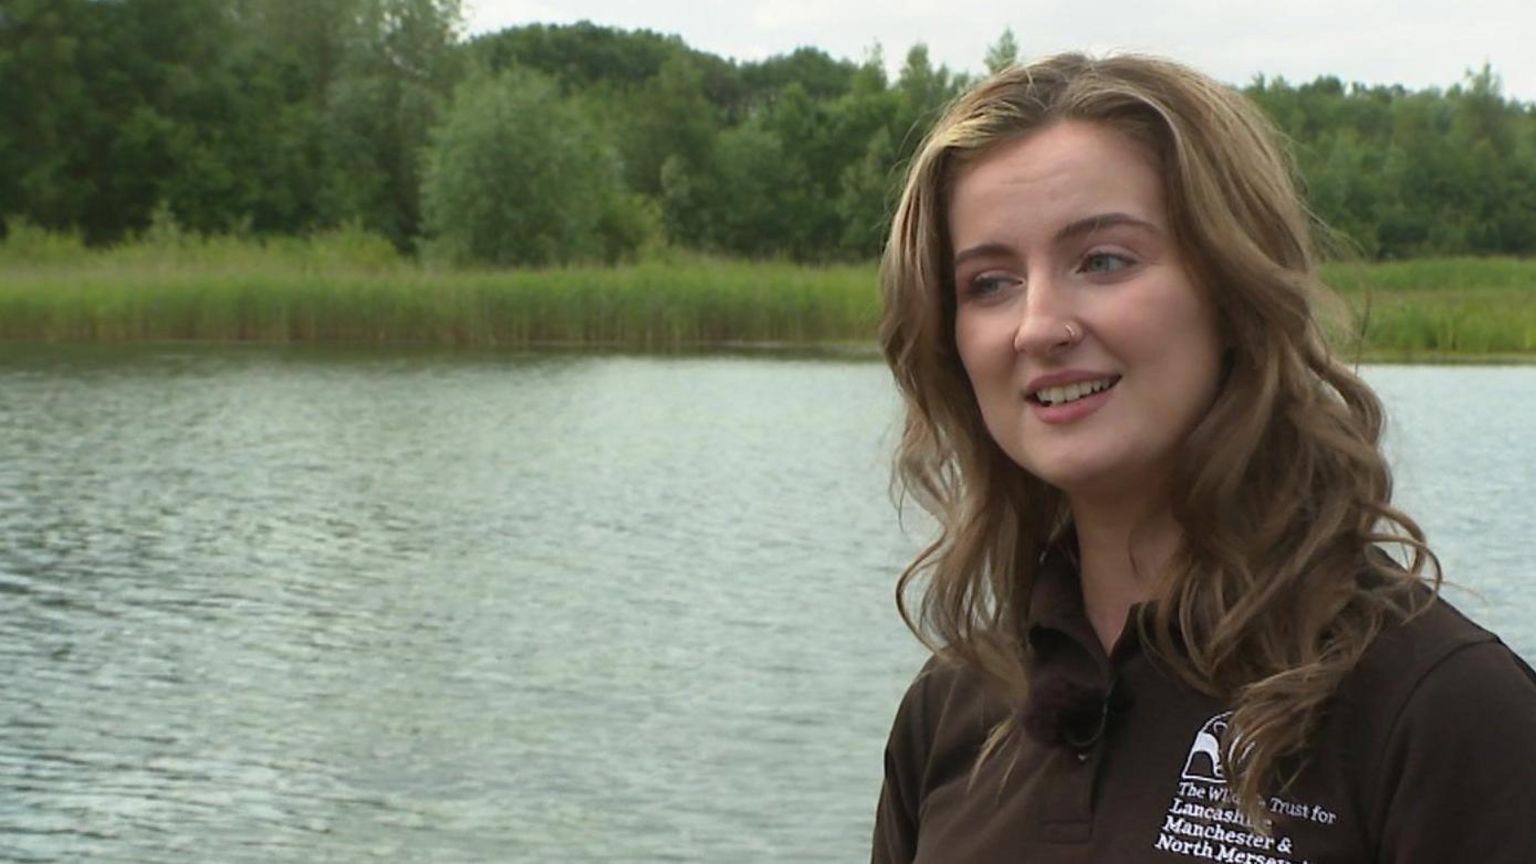 Lydia German wearing a Lancashire Wildlife Trust standing by a river